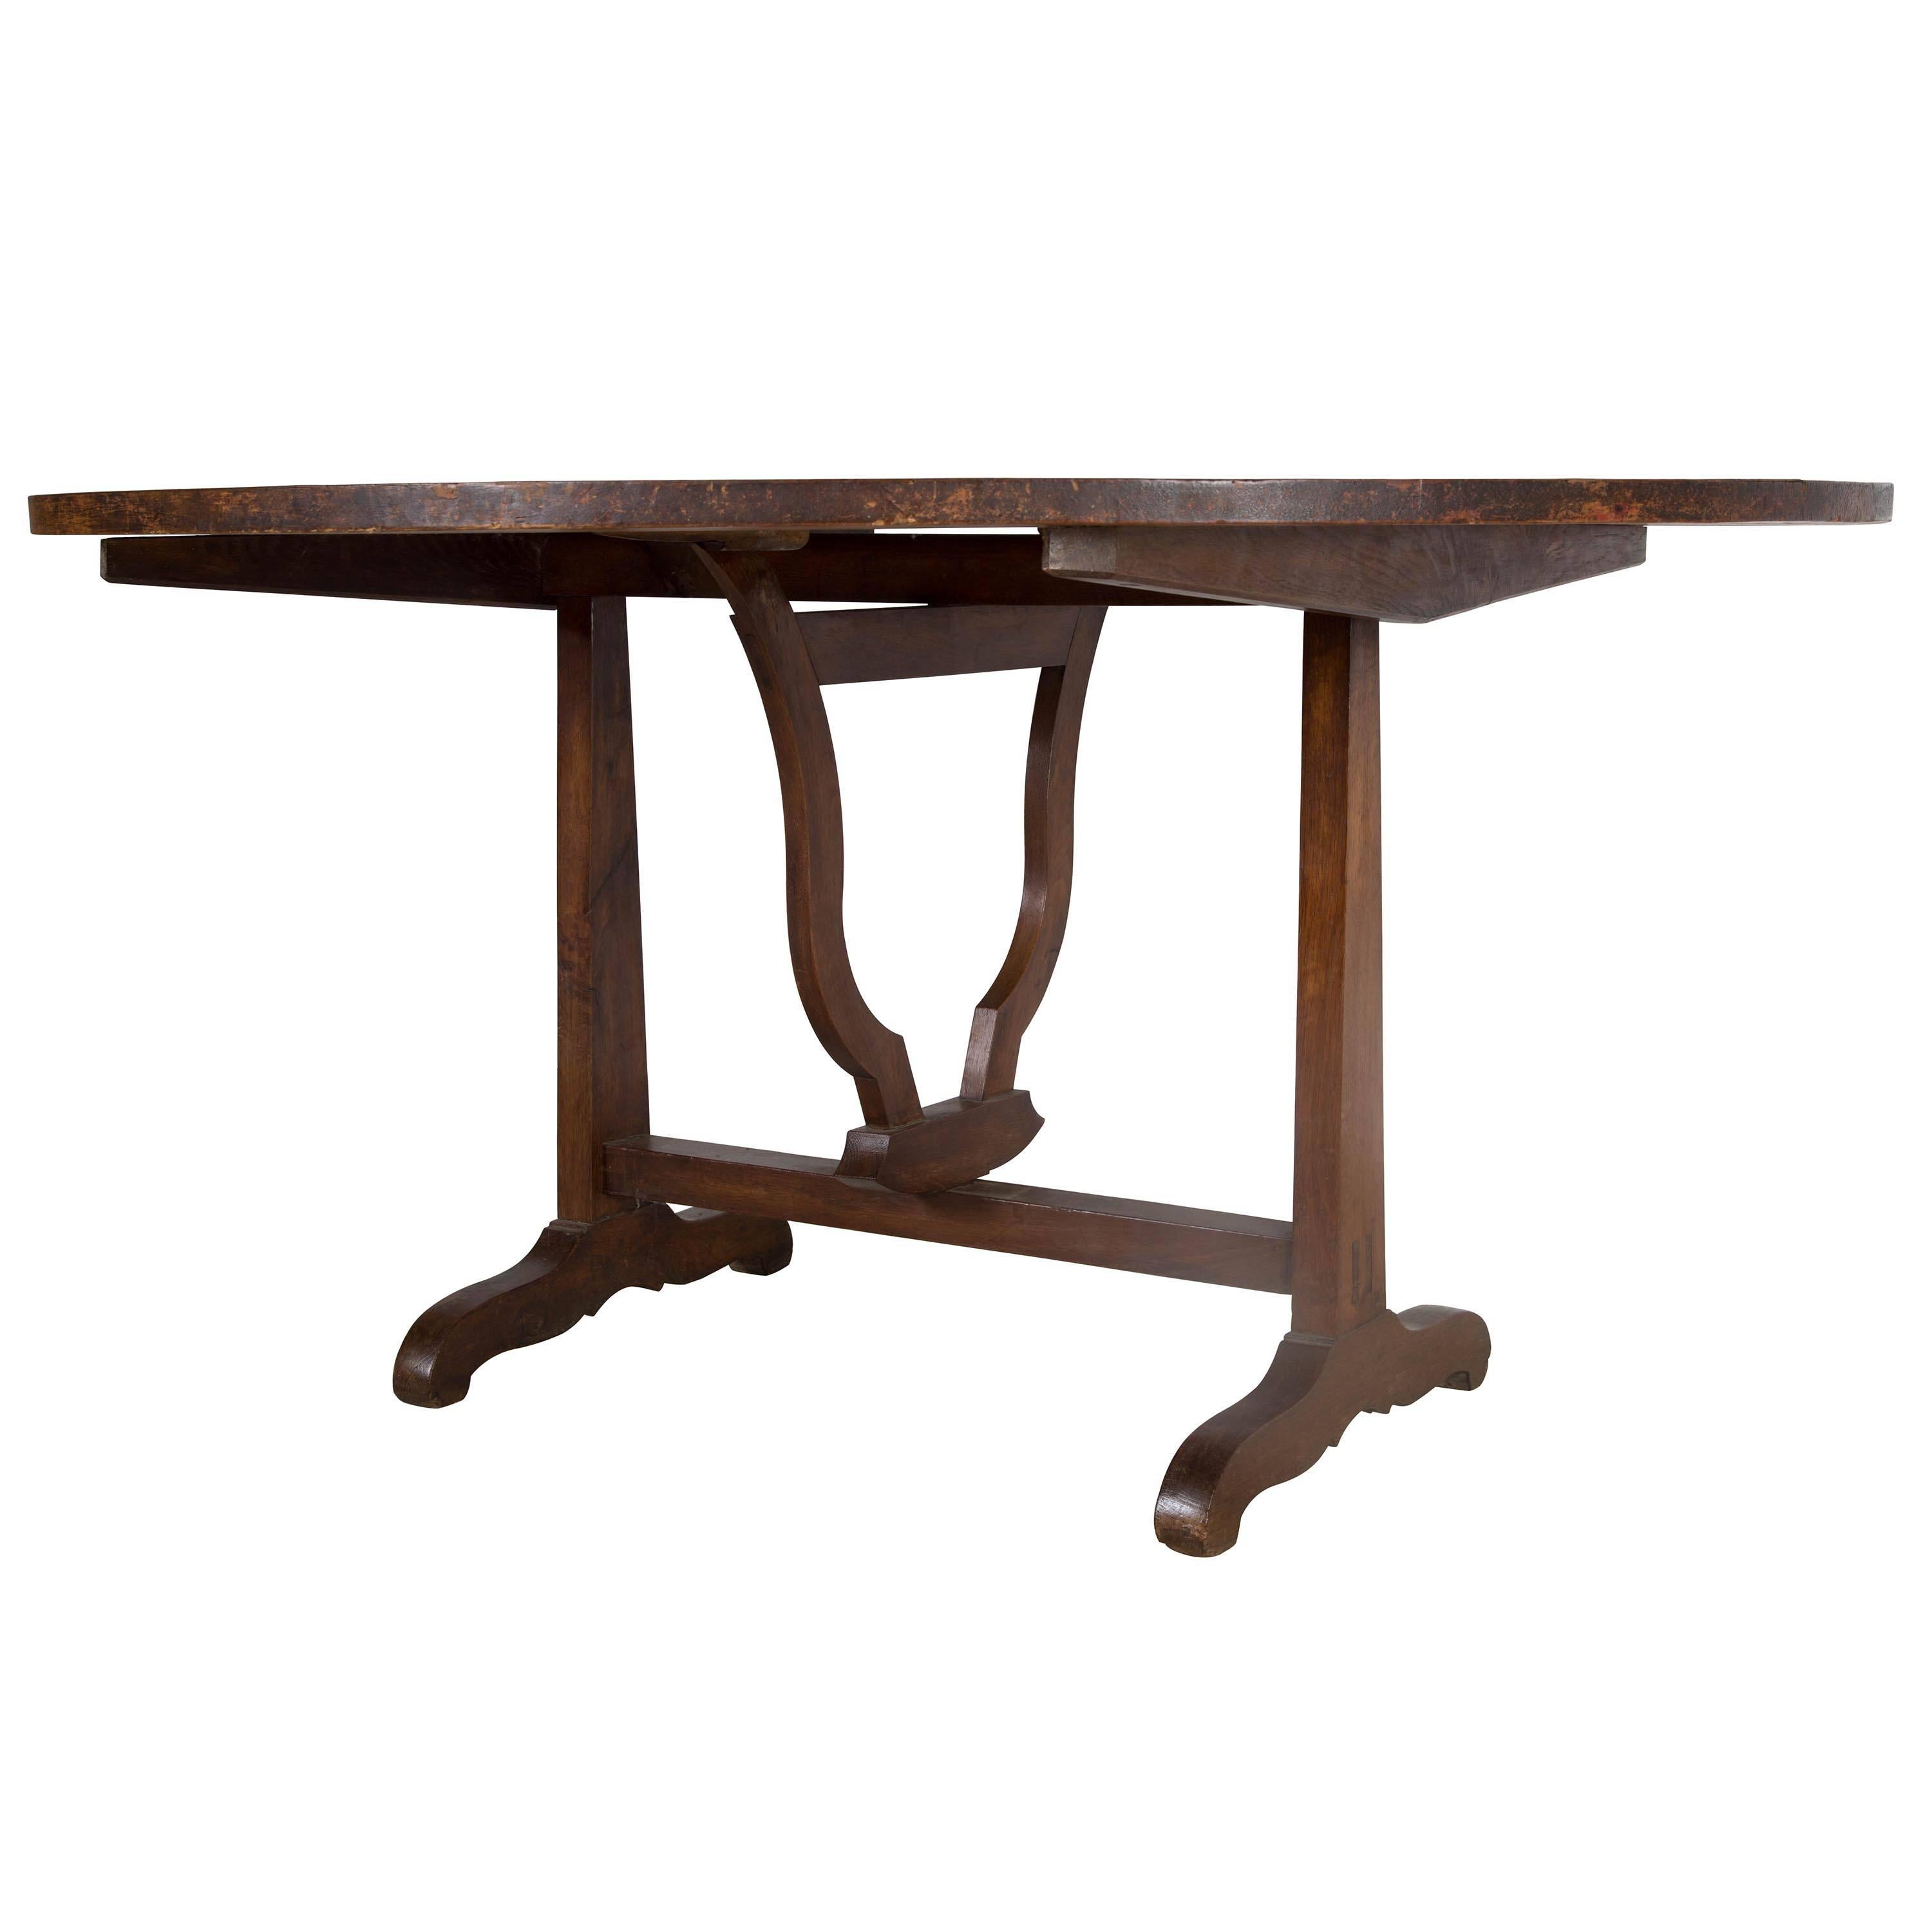 Large 19th century oak and pine vendange table. The top cross-banded with walnut and covered in oil cloth.